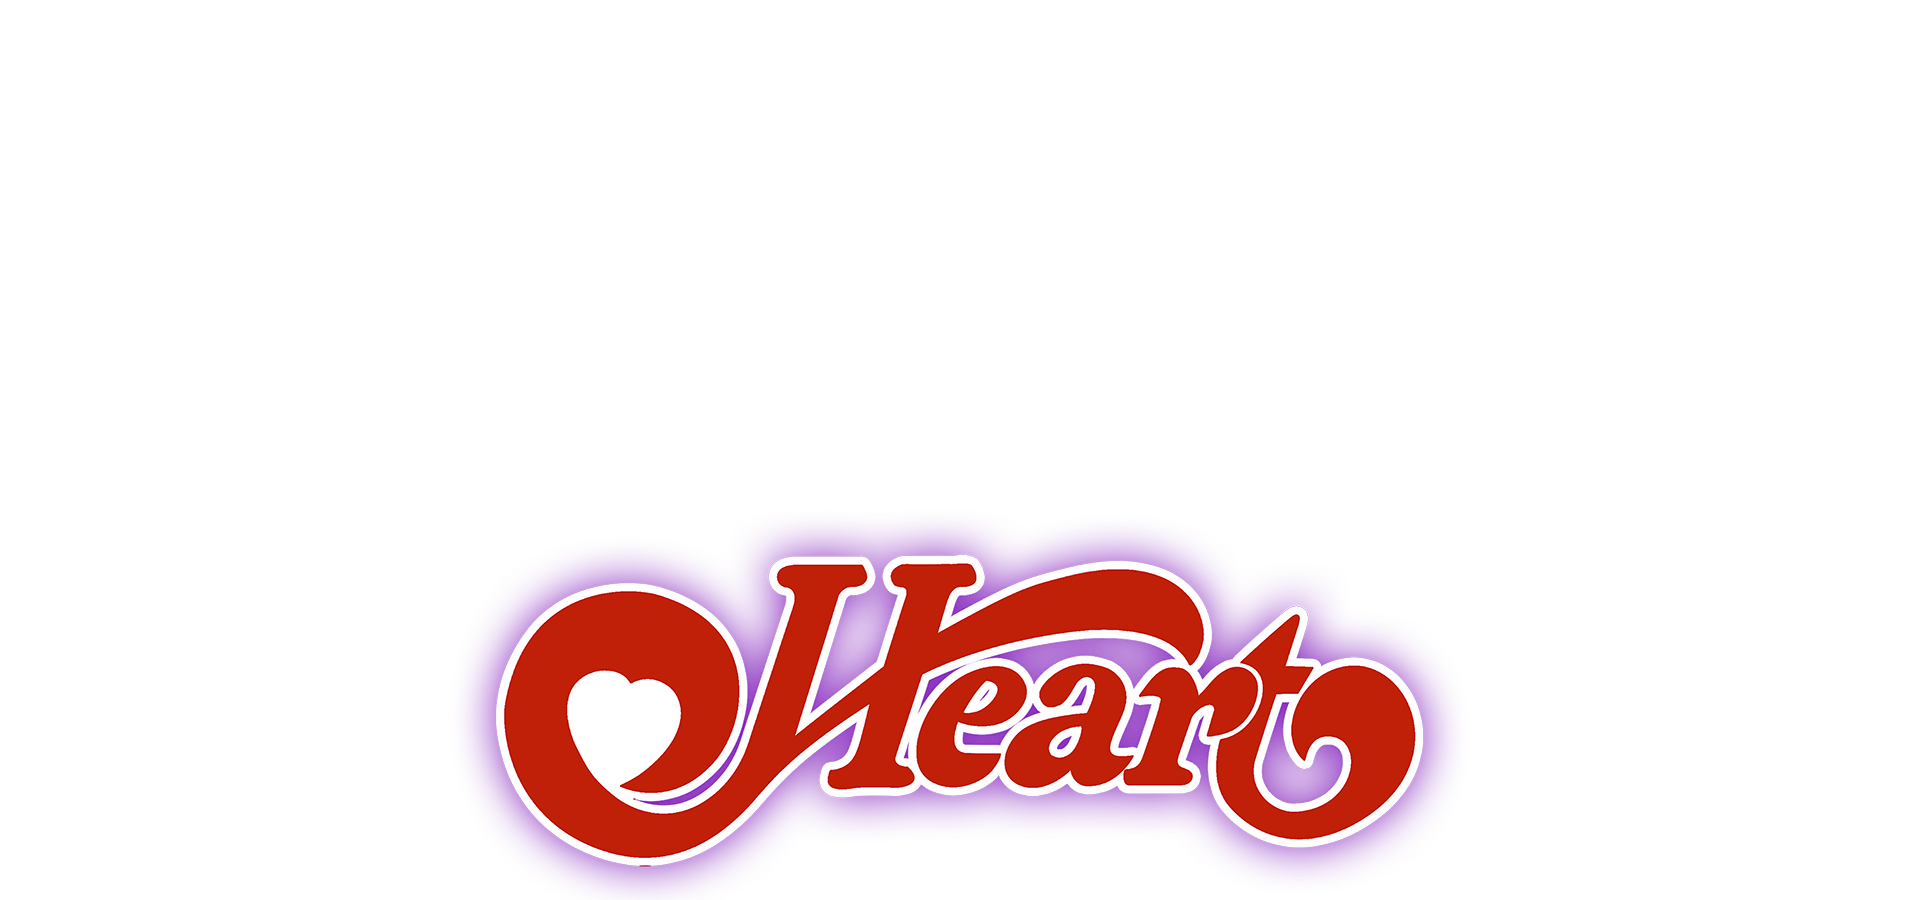 new years day band heart logo